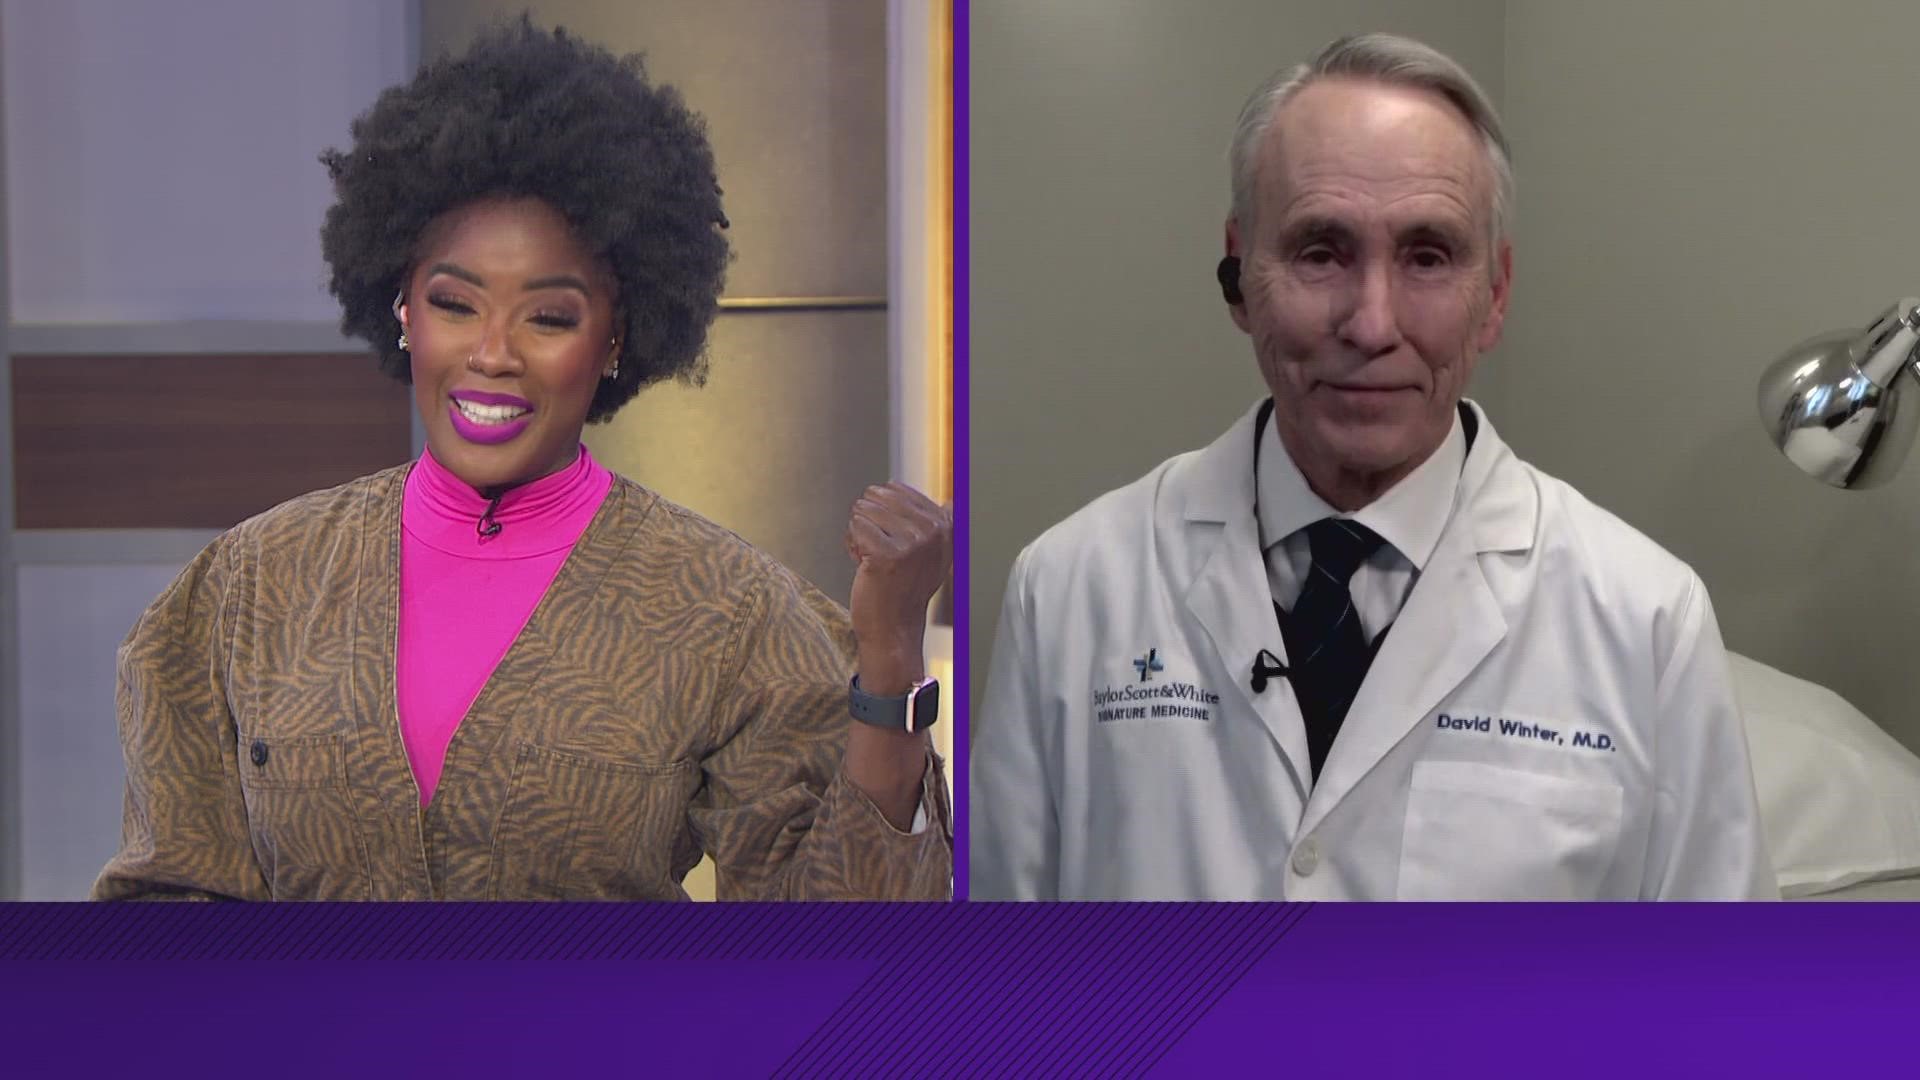 Dr. David Winter from Baylor Scott & White Health explains the latest health-related news to WFAA's Tashara Parker.